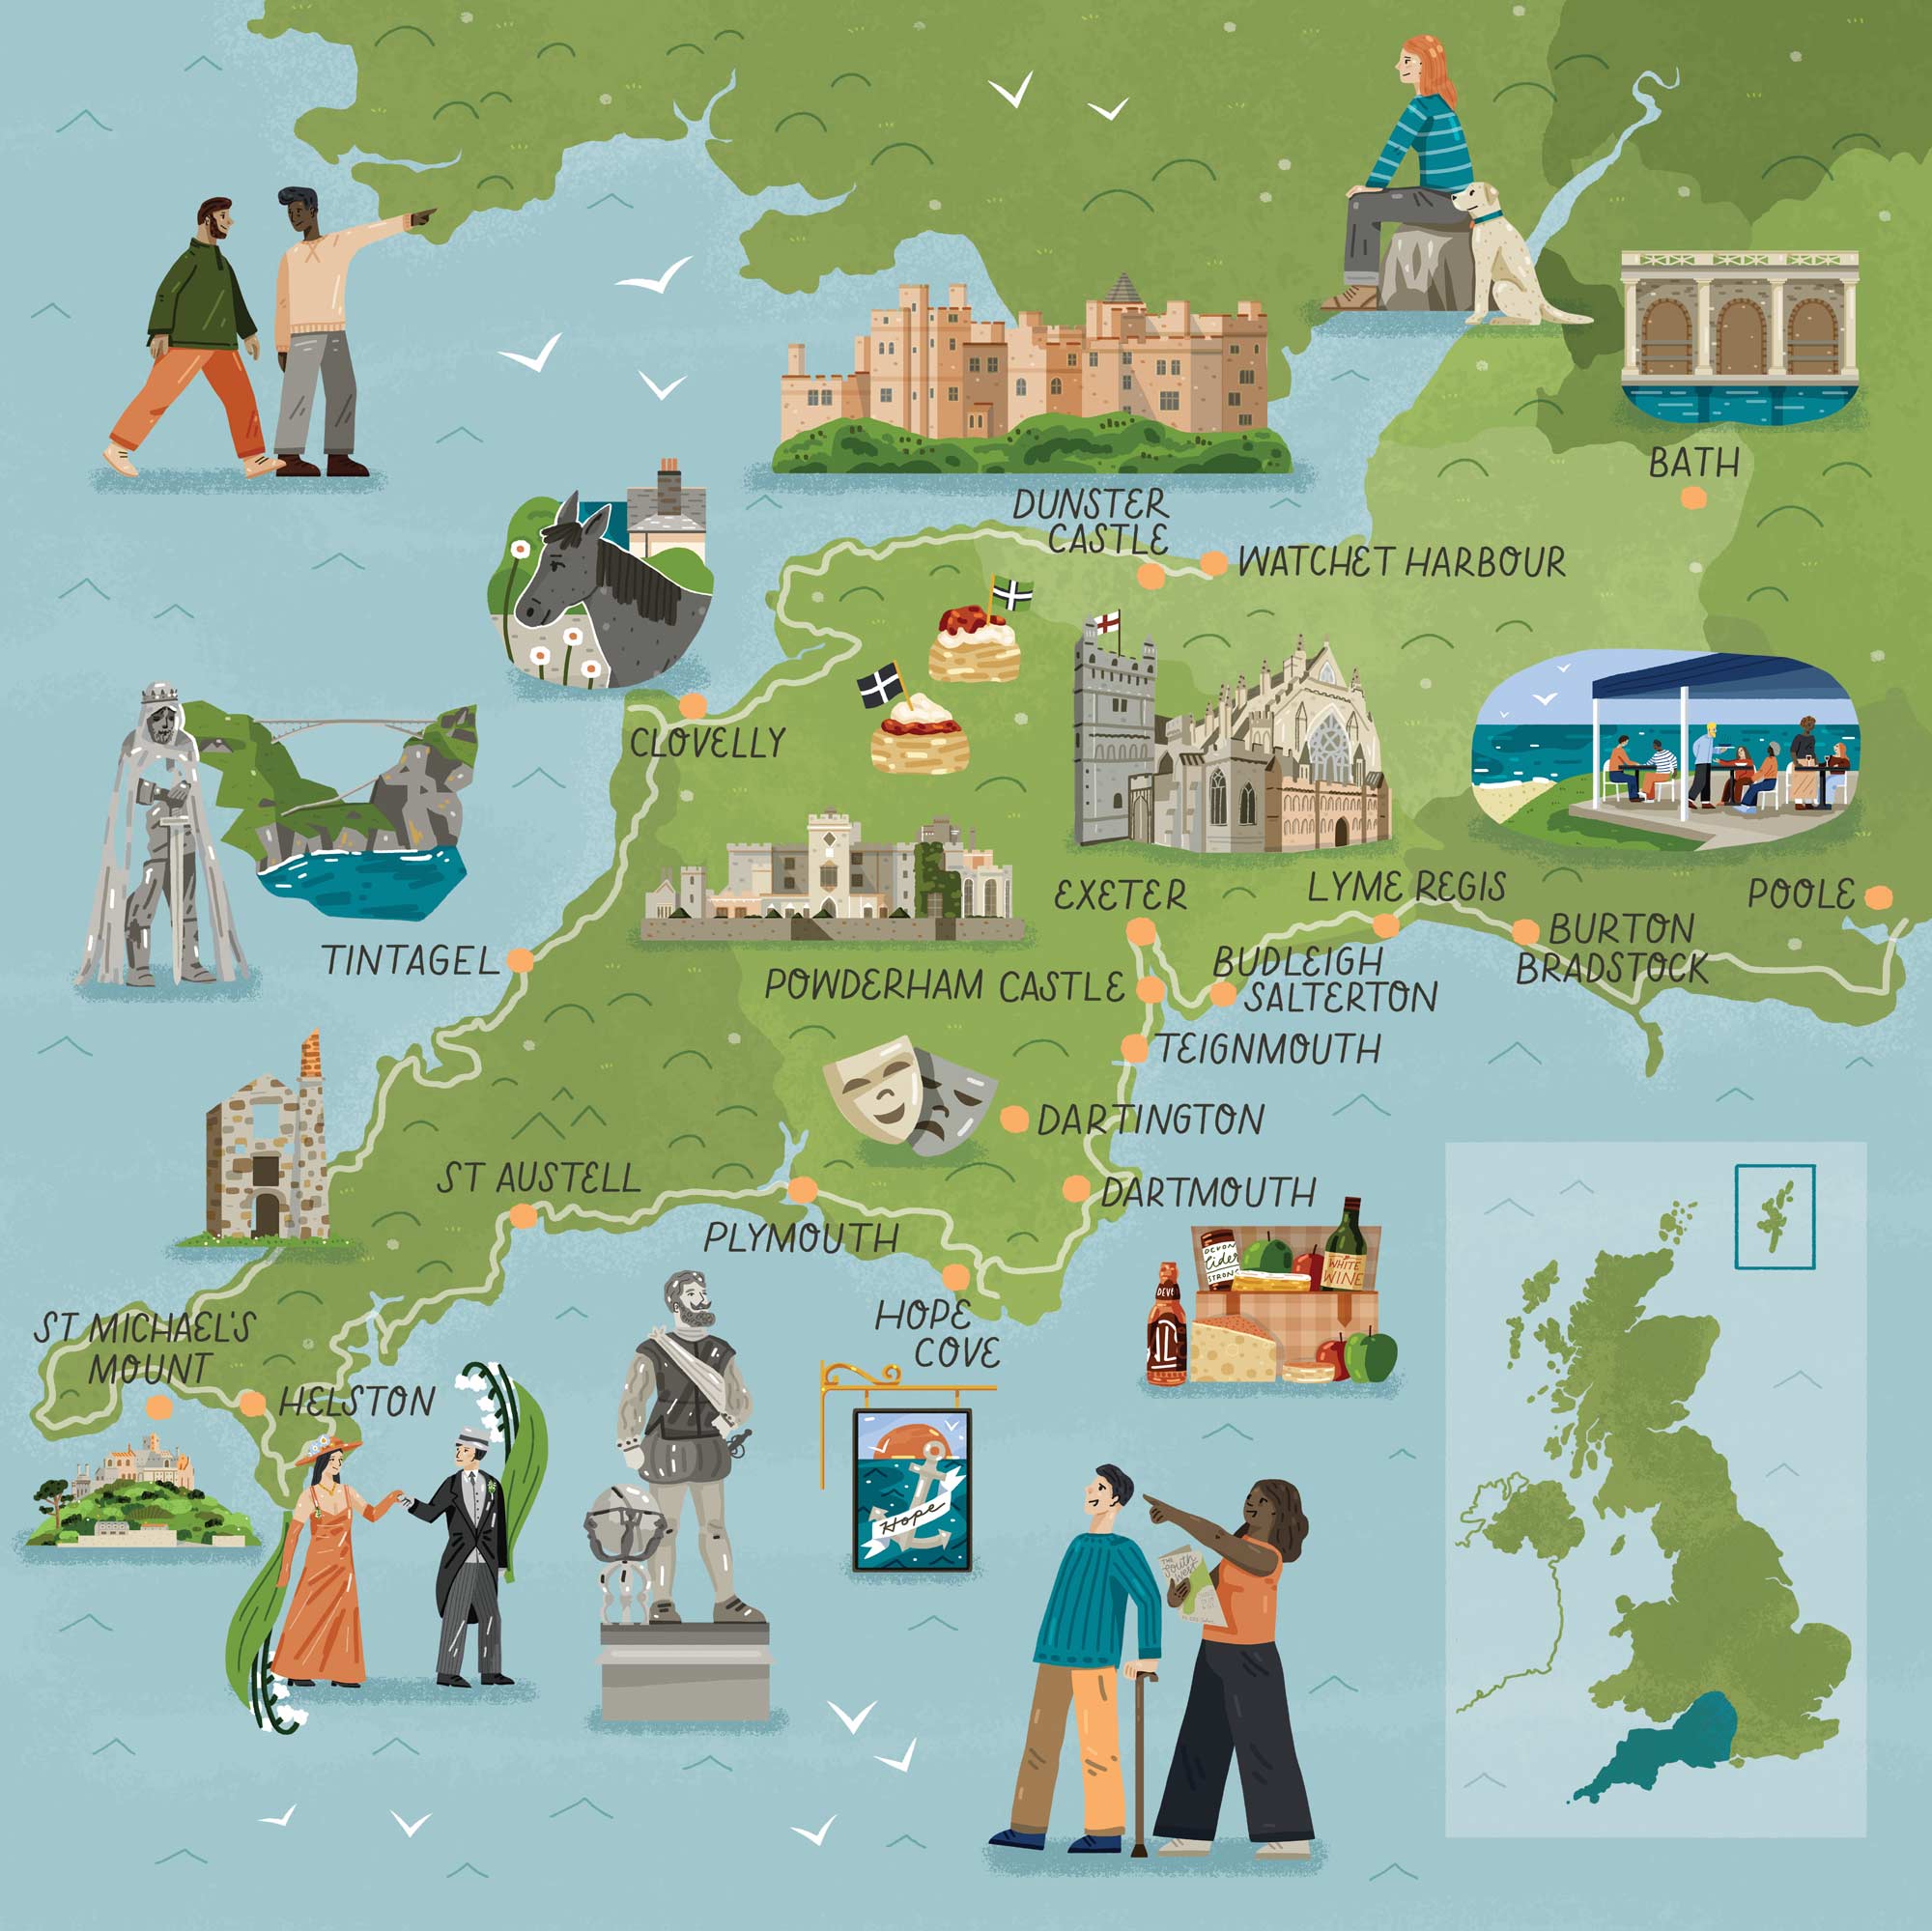 An illustrated map of the South West for Discover Britain by Elly Jahnz